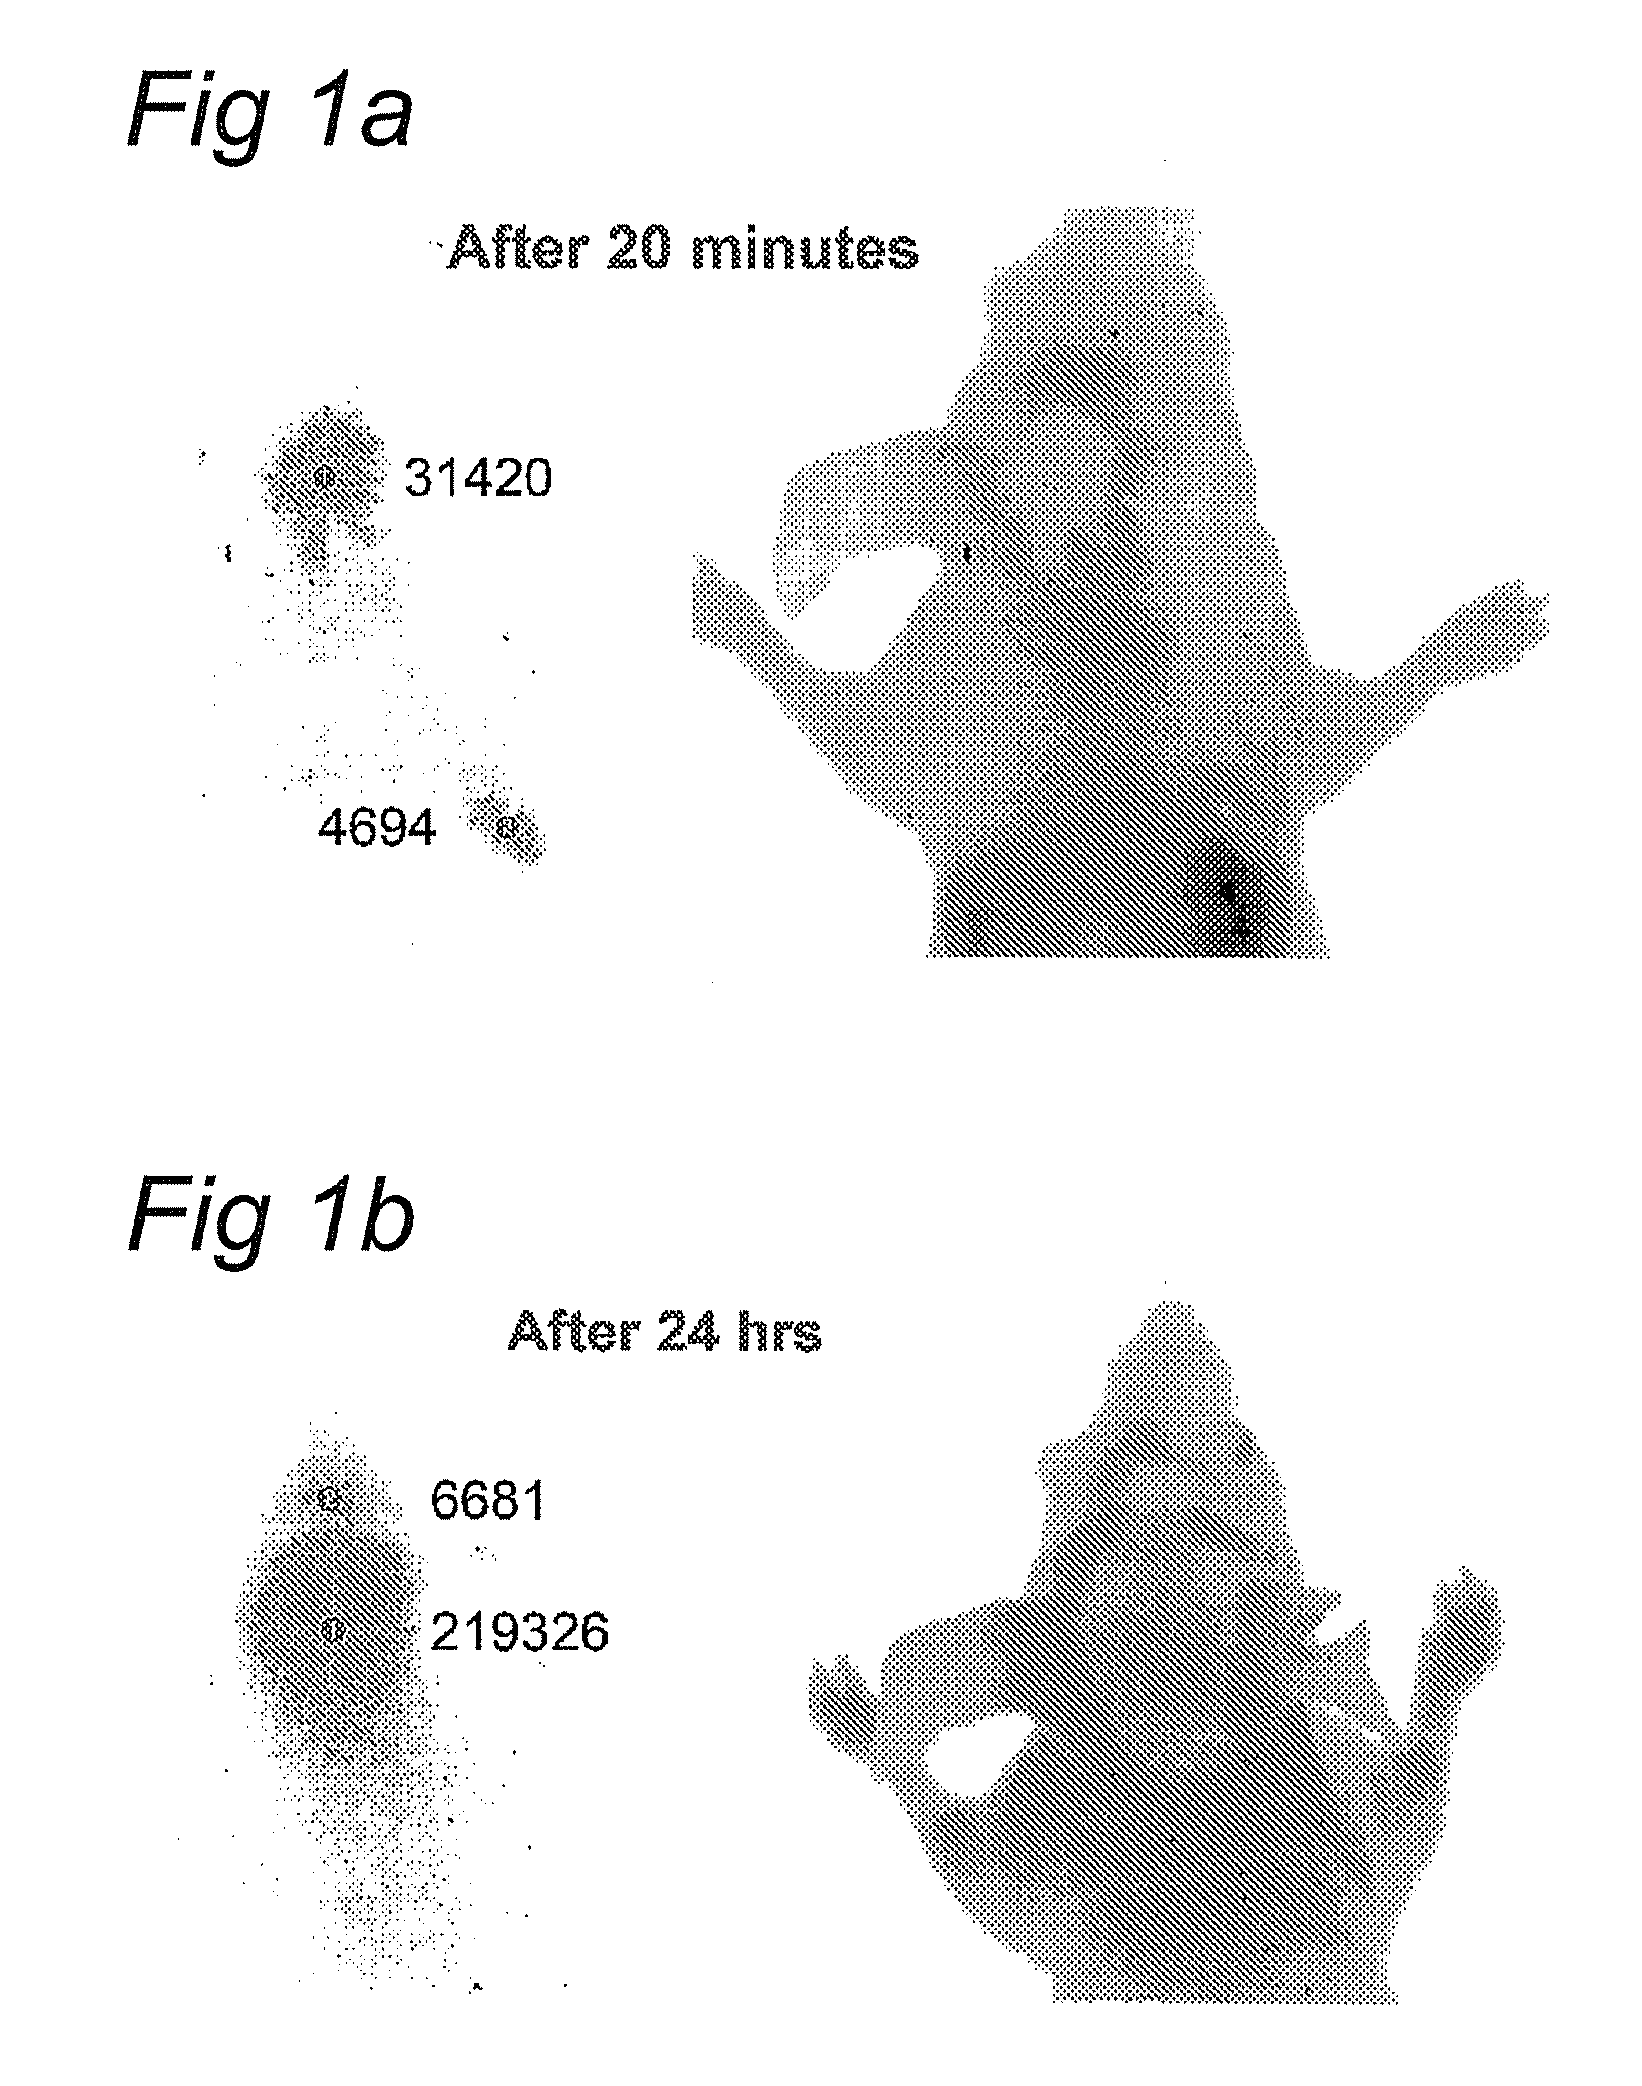 Molecules for targeting compounds to various selected organs, tissues or tumor cells